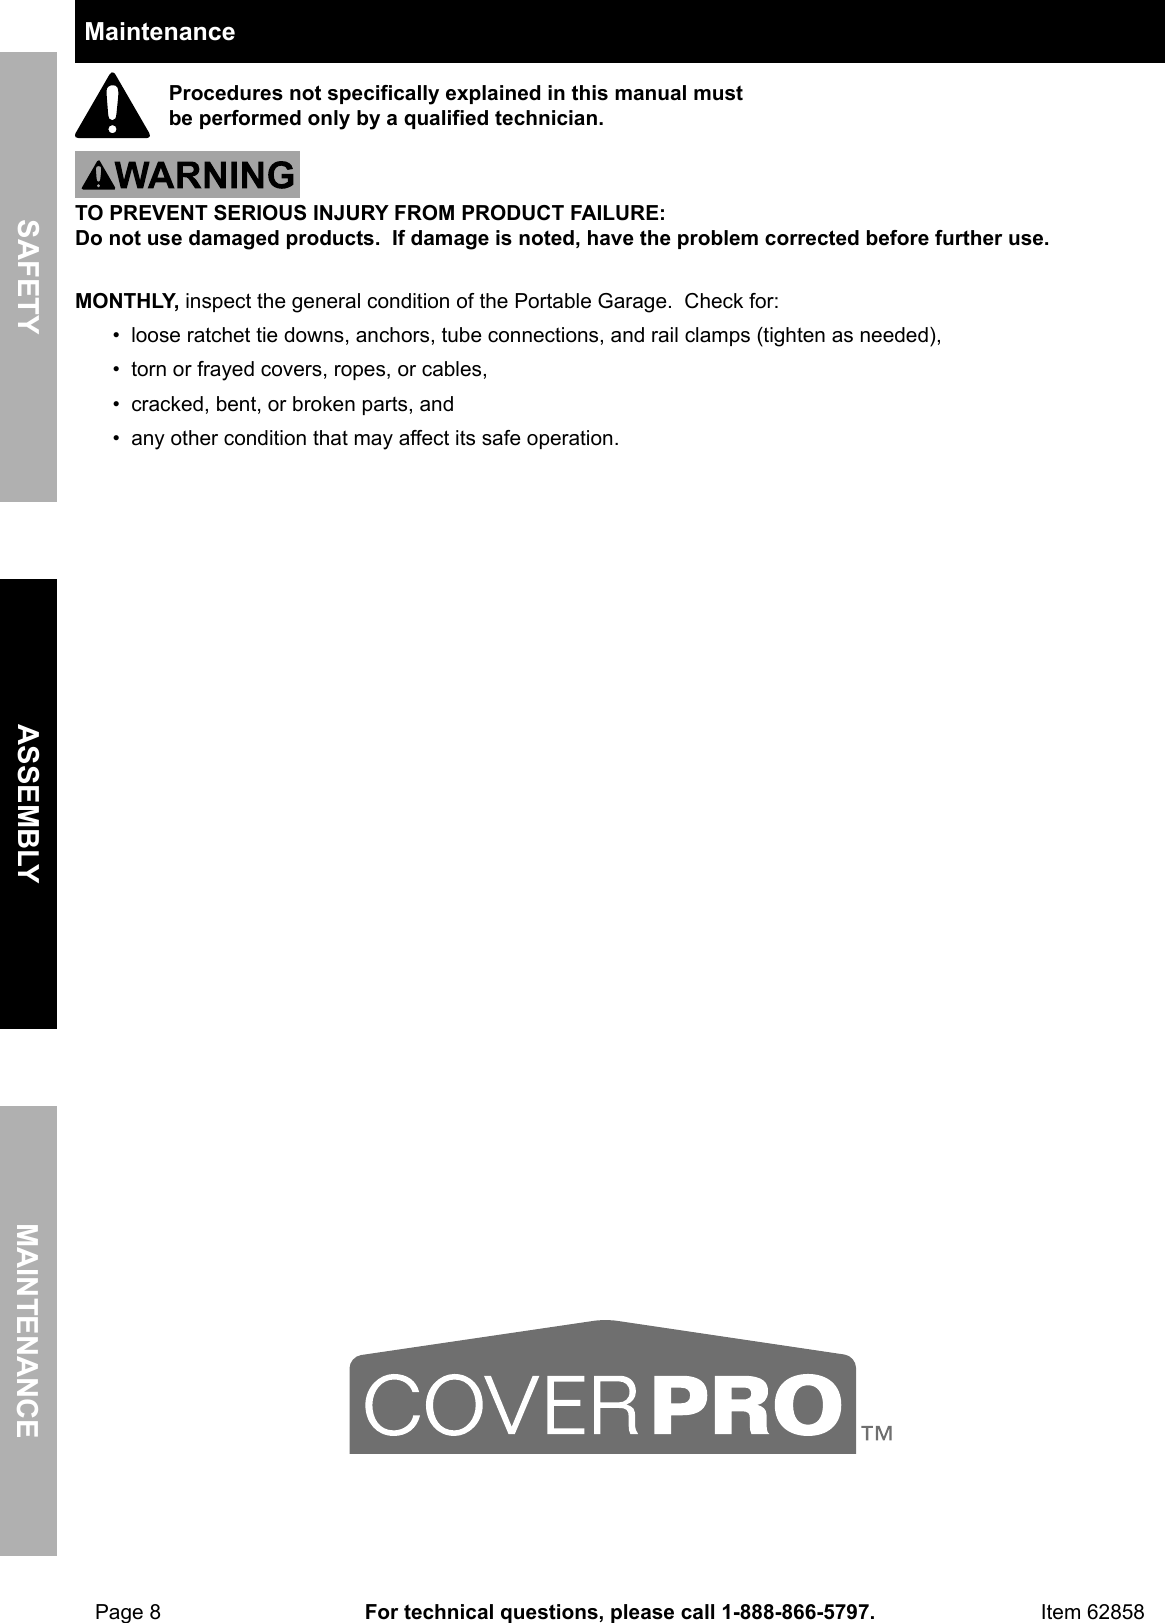 Page 8 of 12 - Manual For The 62858 10 Ft. X 20 Portable Car Canopy